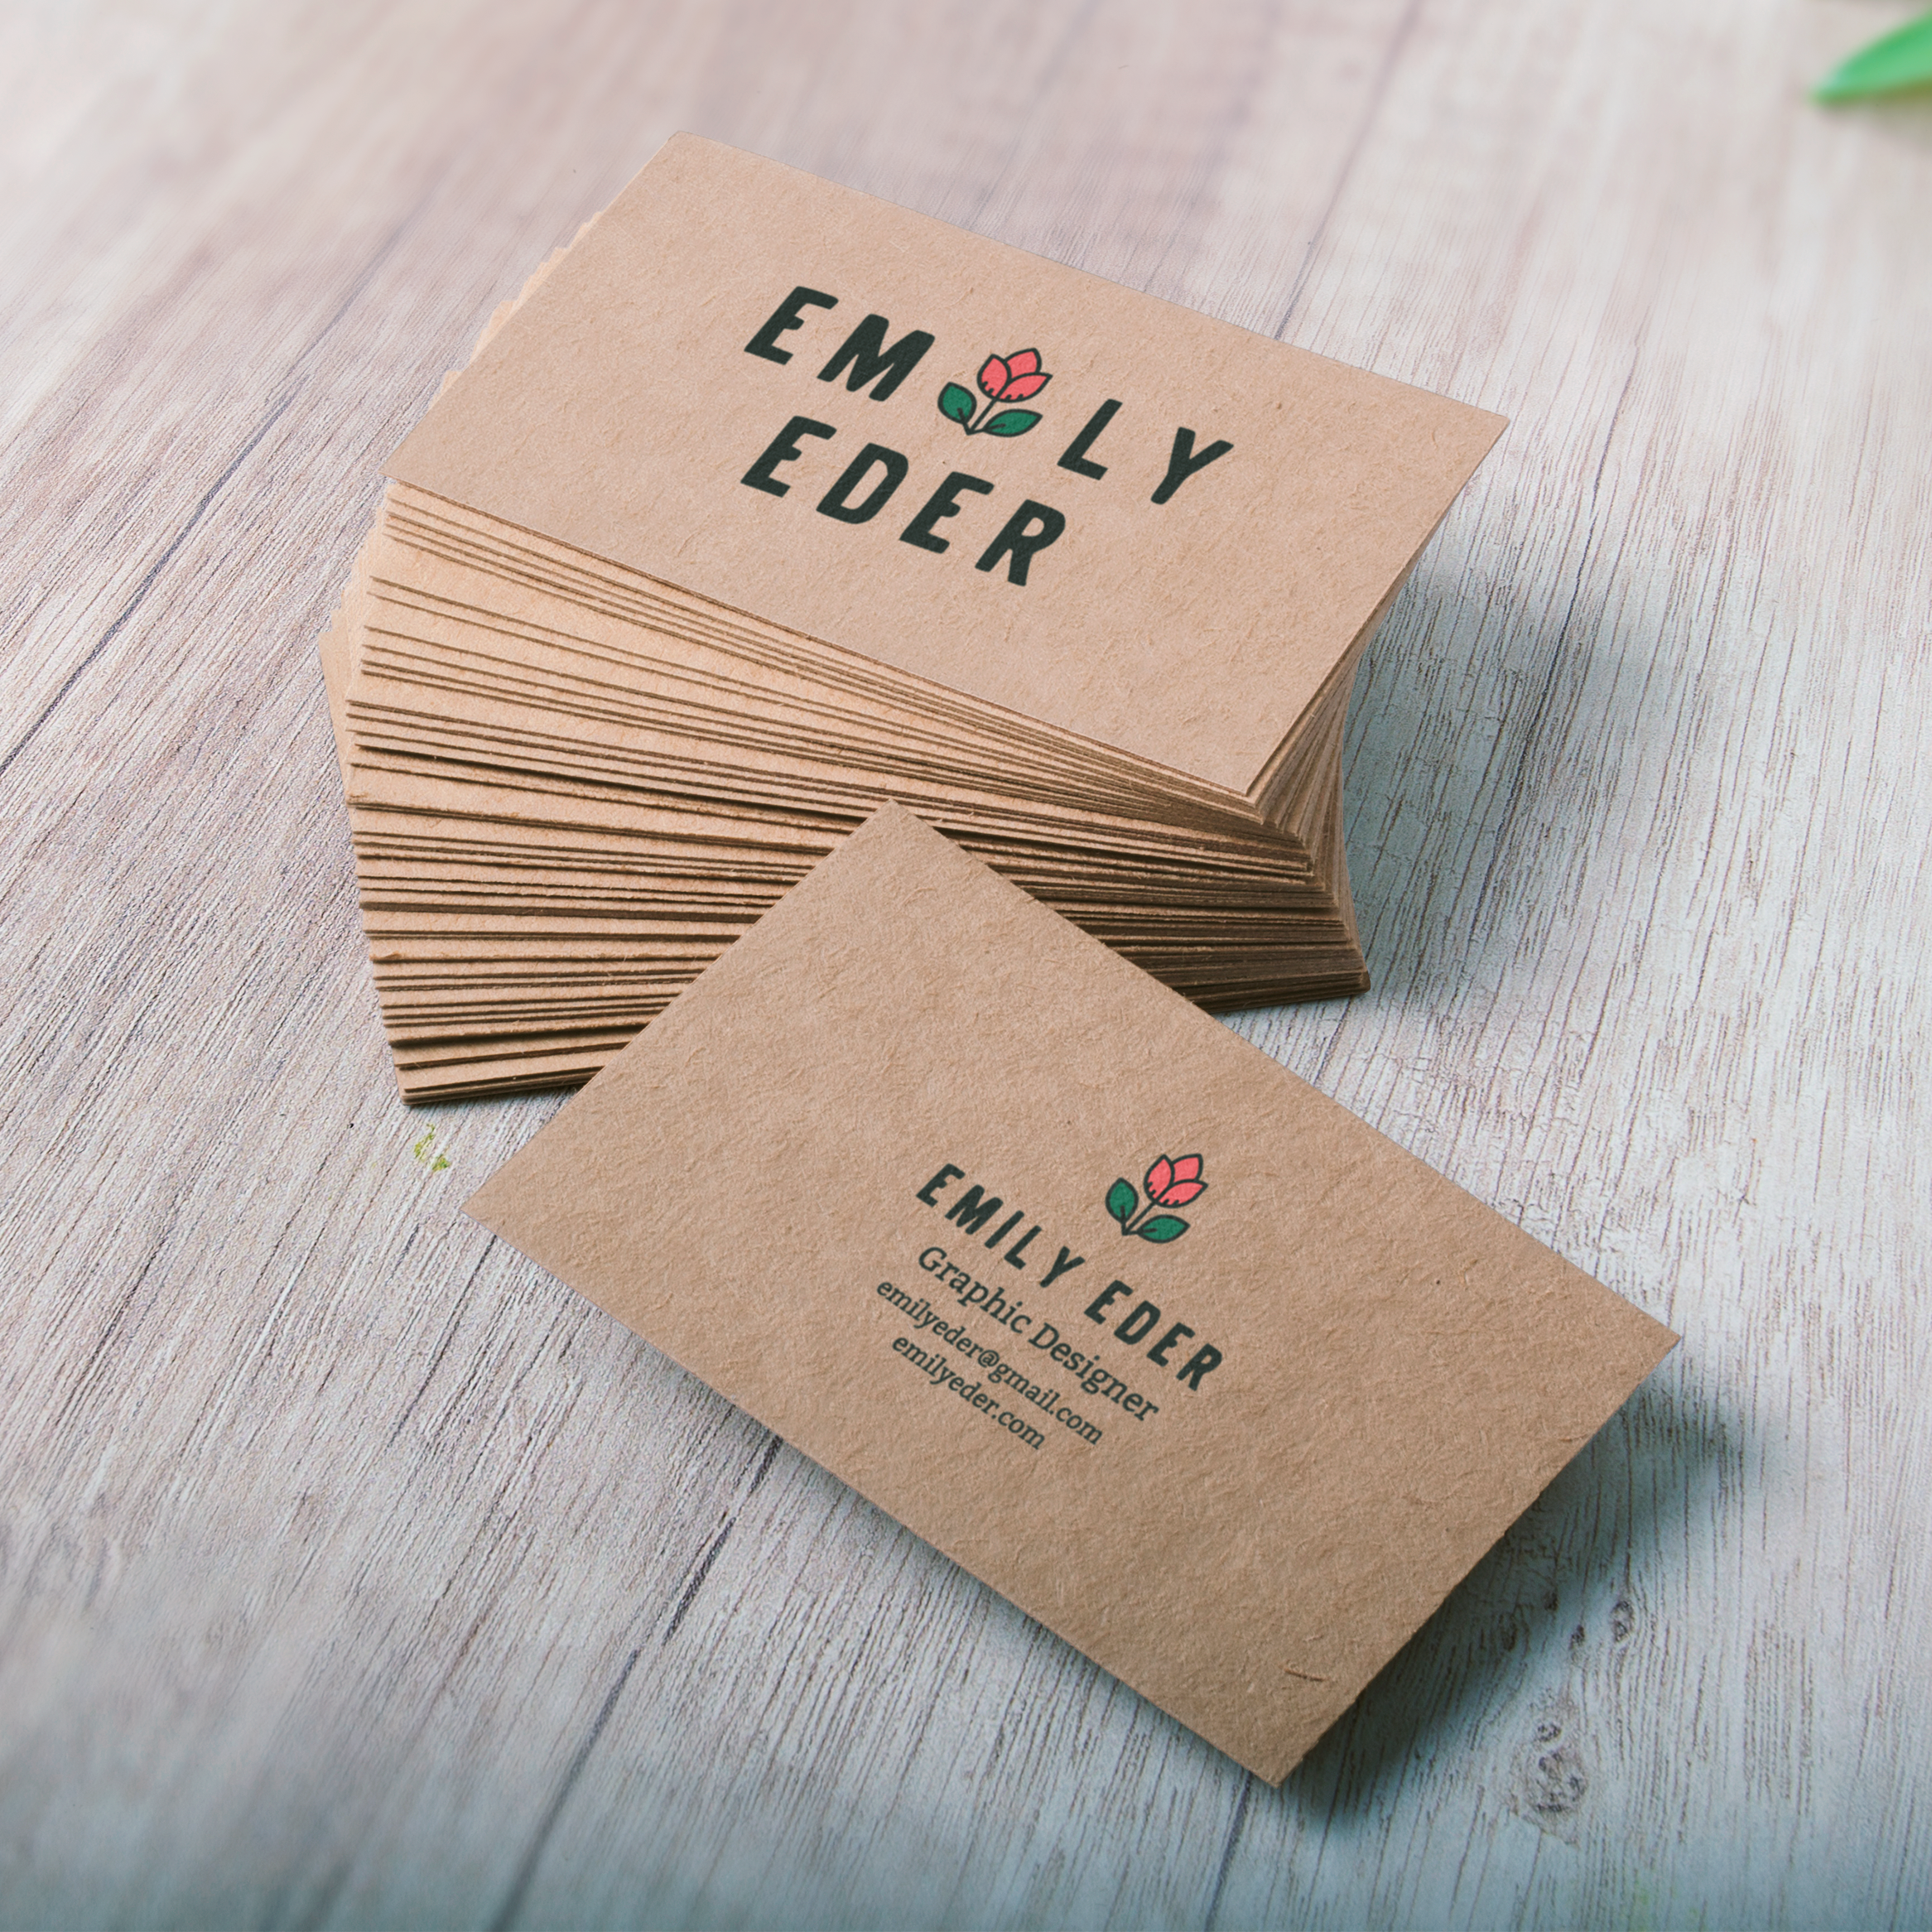 Personal Business Card Emily Eder